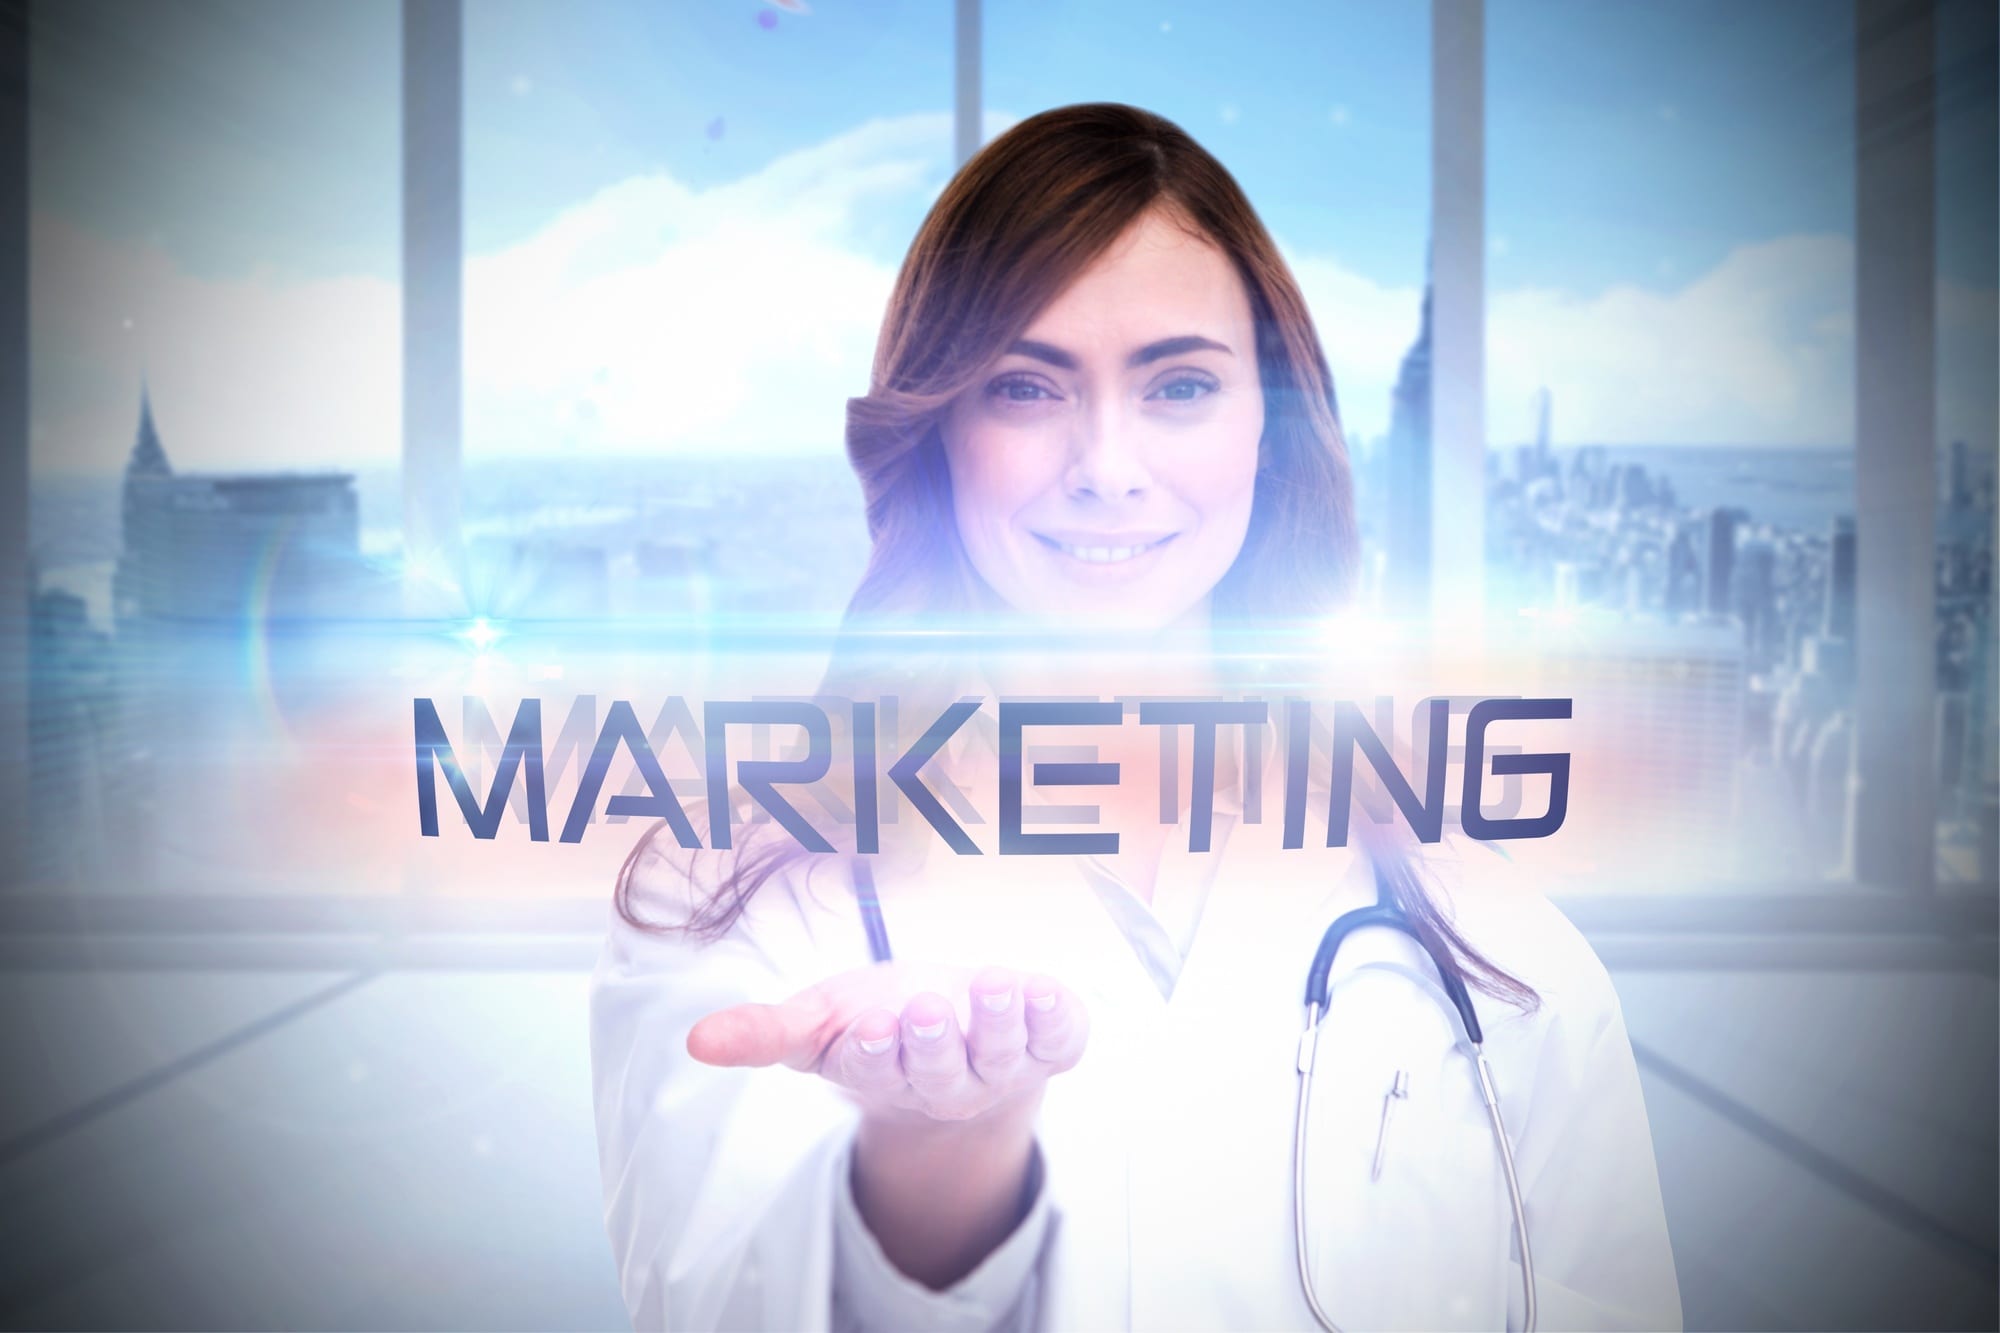 StrategyDriven Online Marketing and Website Development Article, The Importance of Healthcare Marketing for Your Medical Business